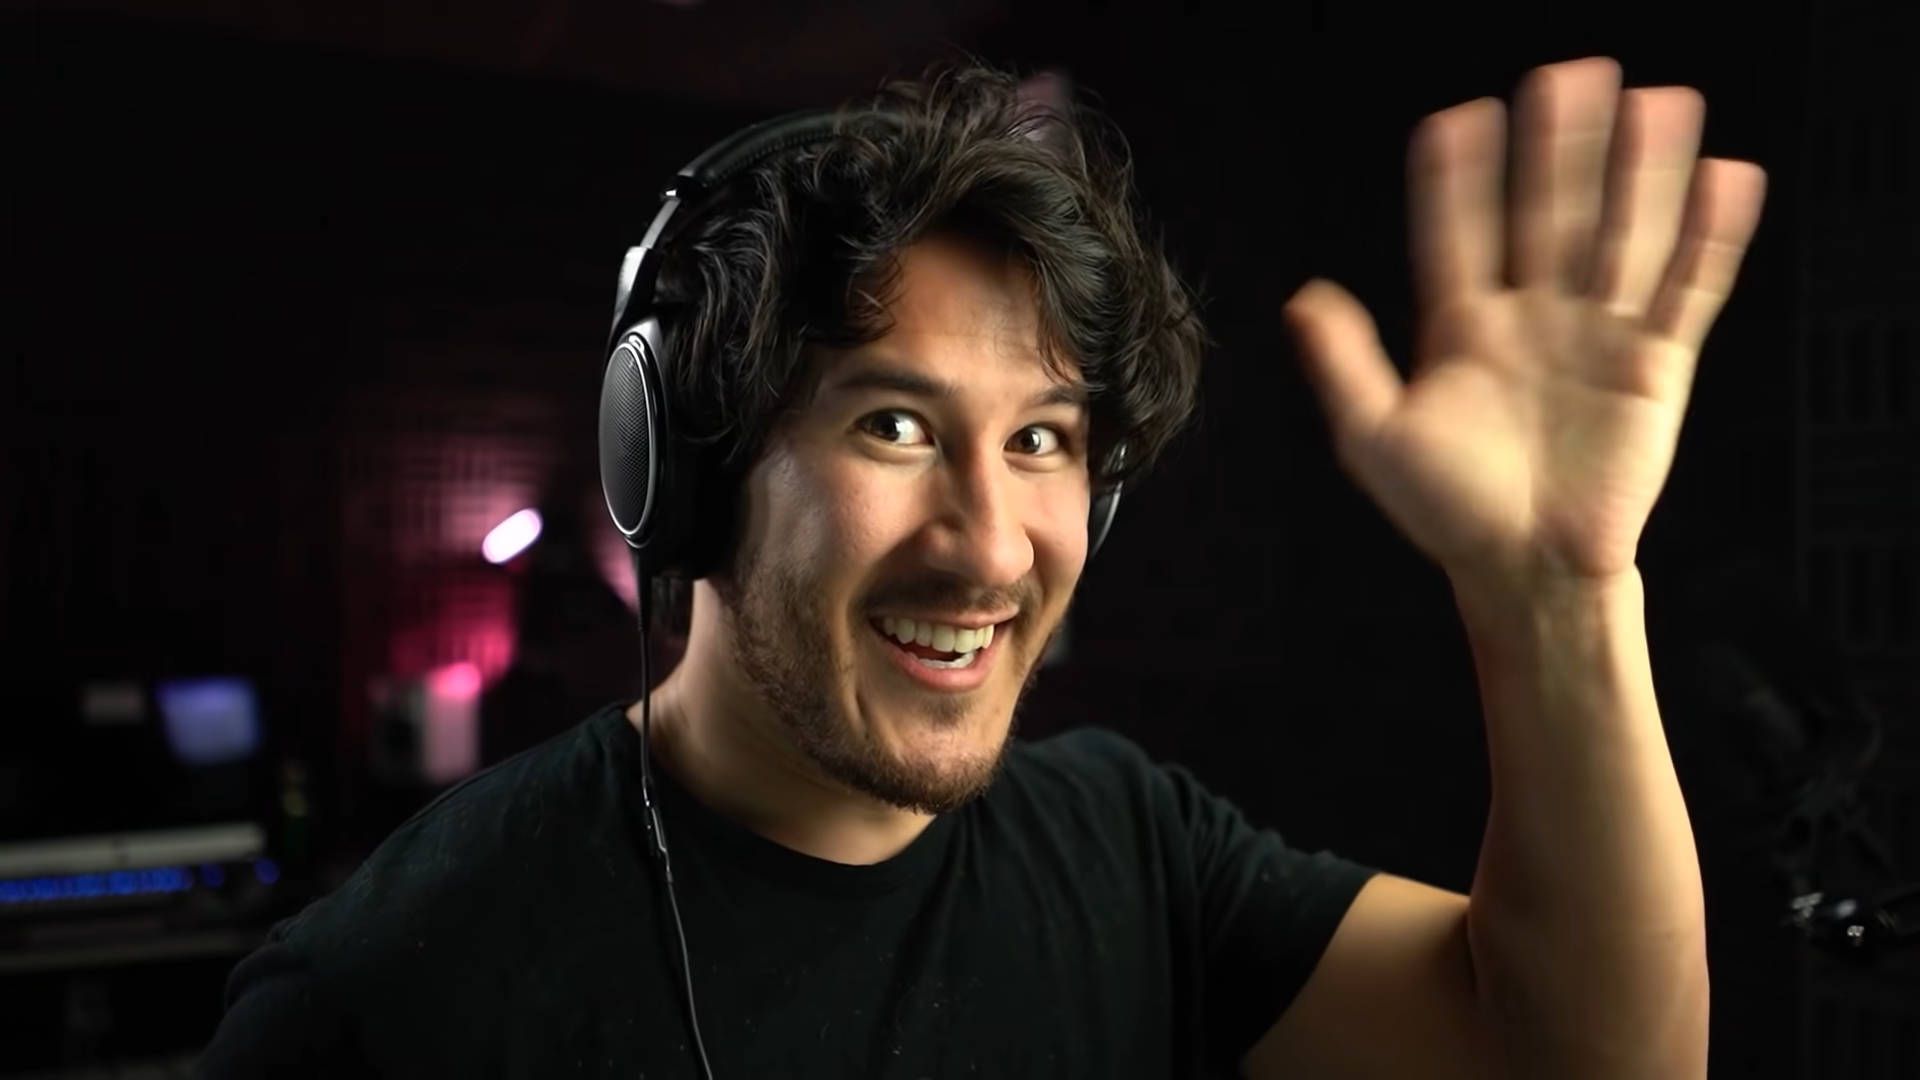 A man wearing a black shirt and a headset smiles and waves at the camera. - Markiplier